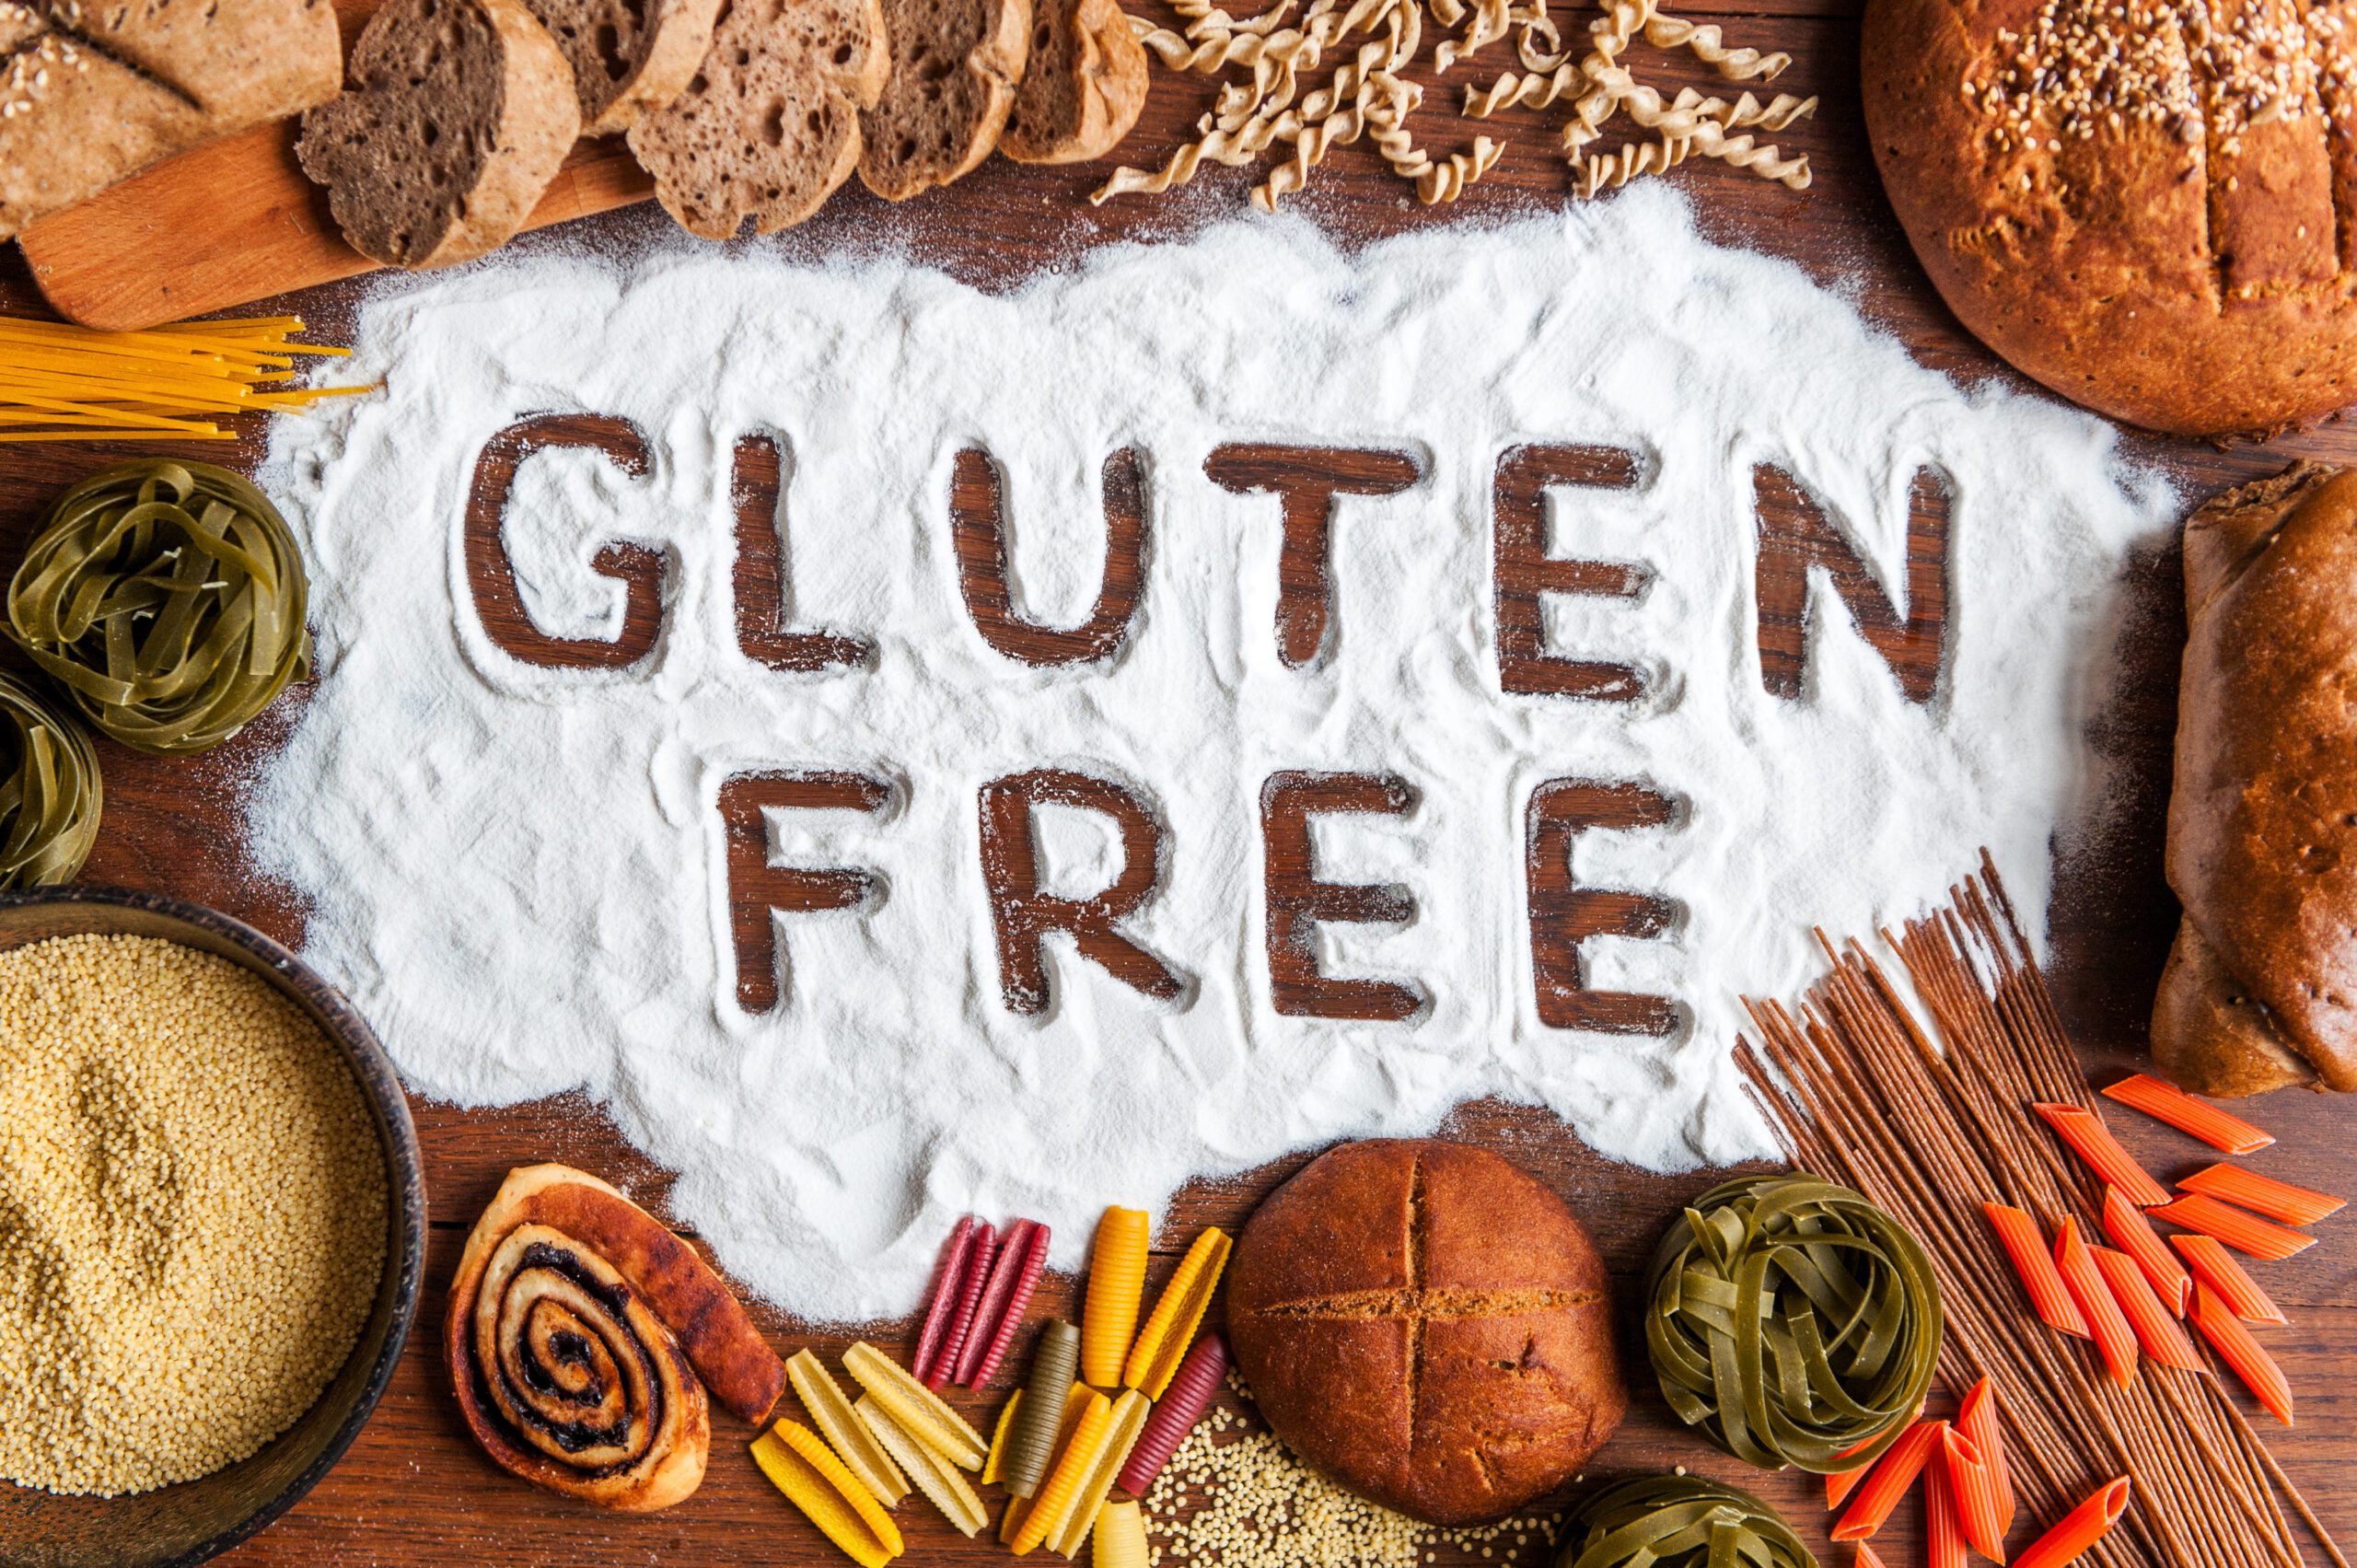 Our Guide to Gluten Free